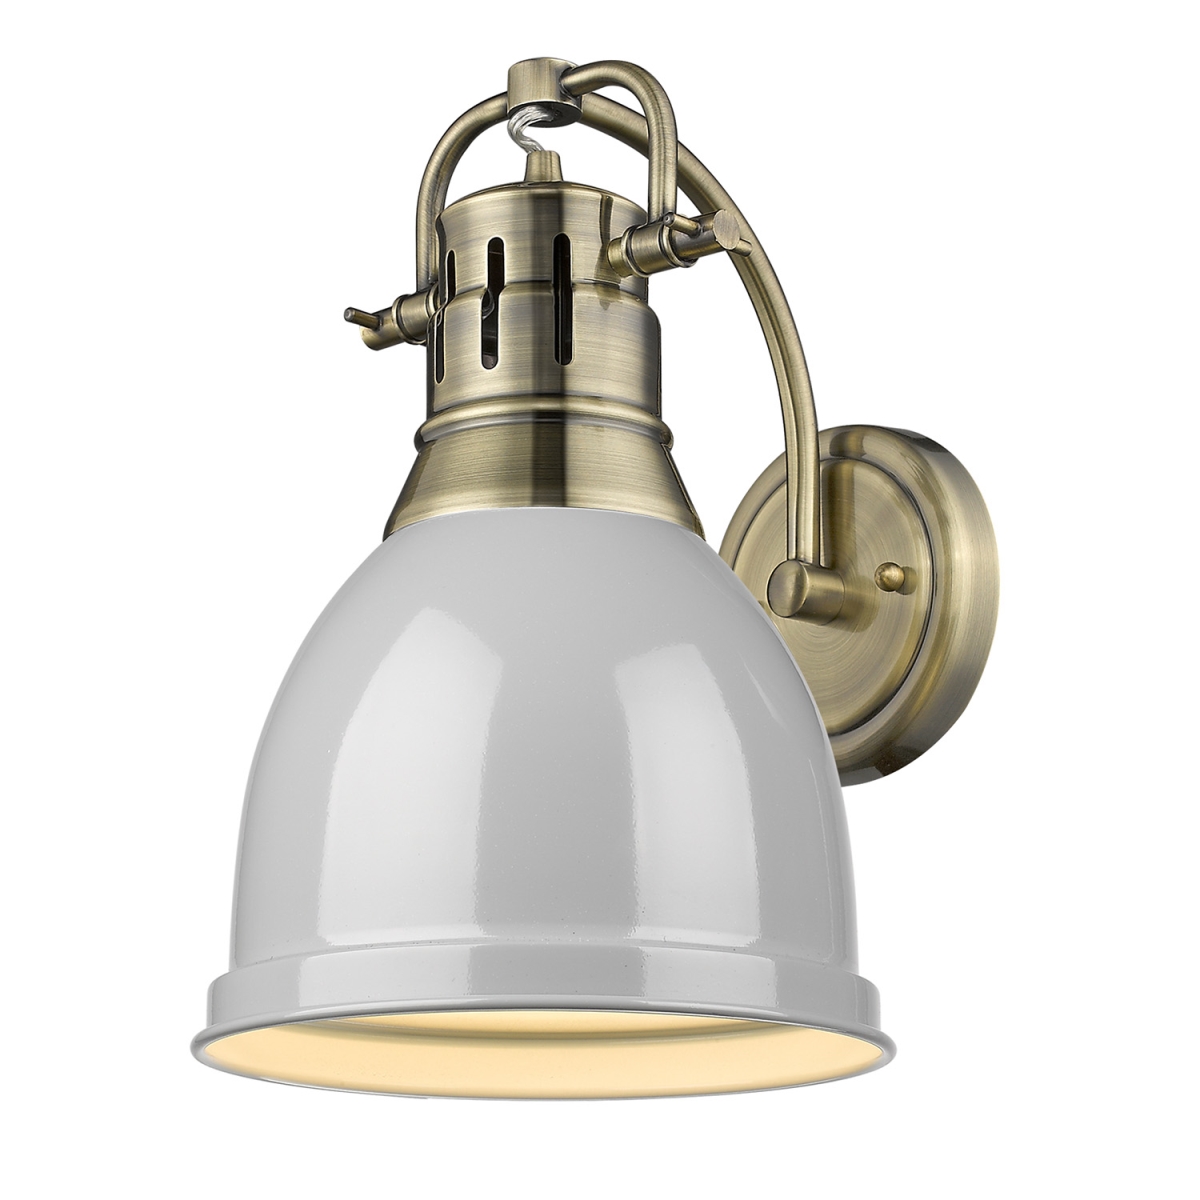 3602-1w Ab-gy Duncan 1 Light Wall Sconce With Gray Shade, Aged Brass